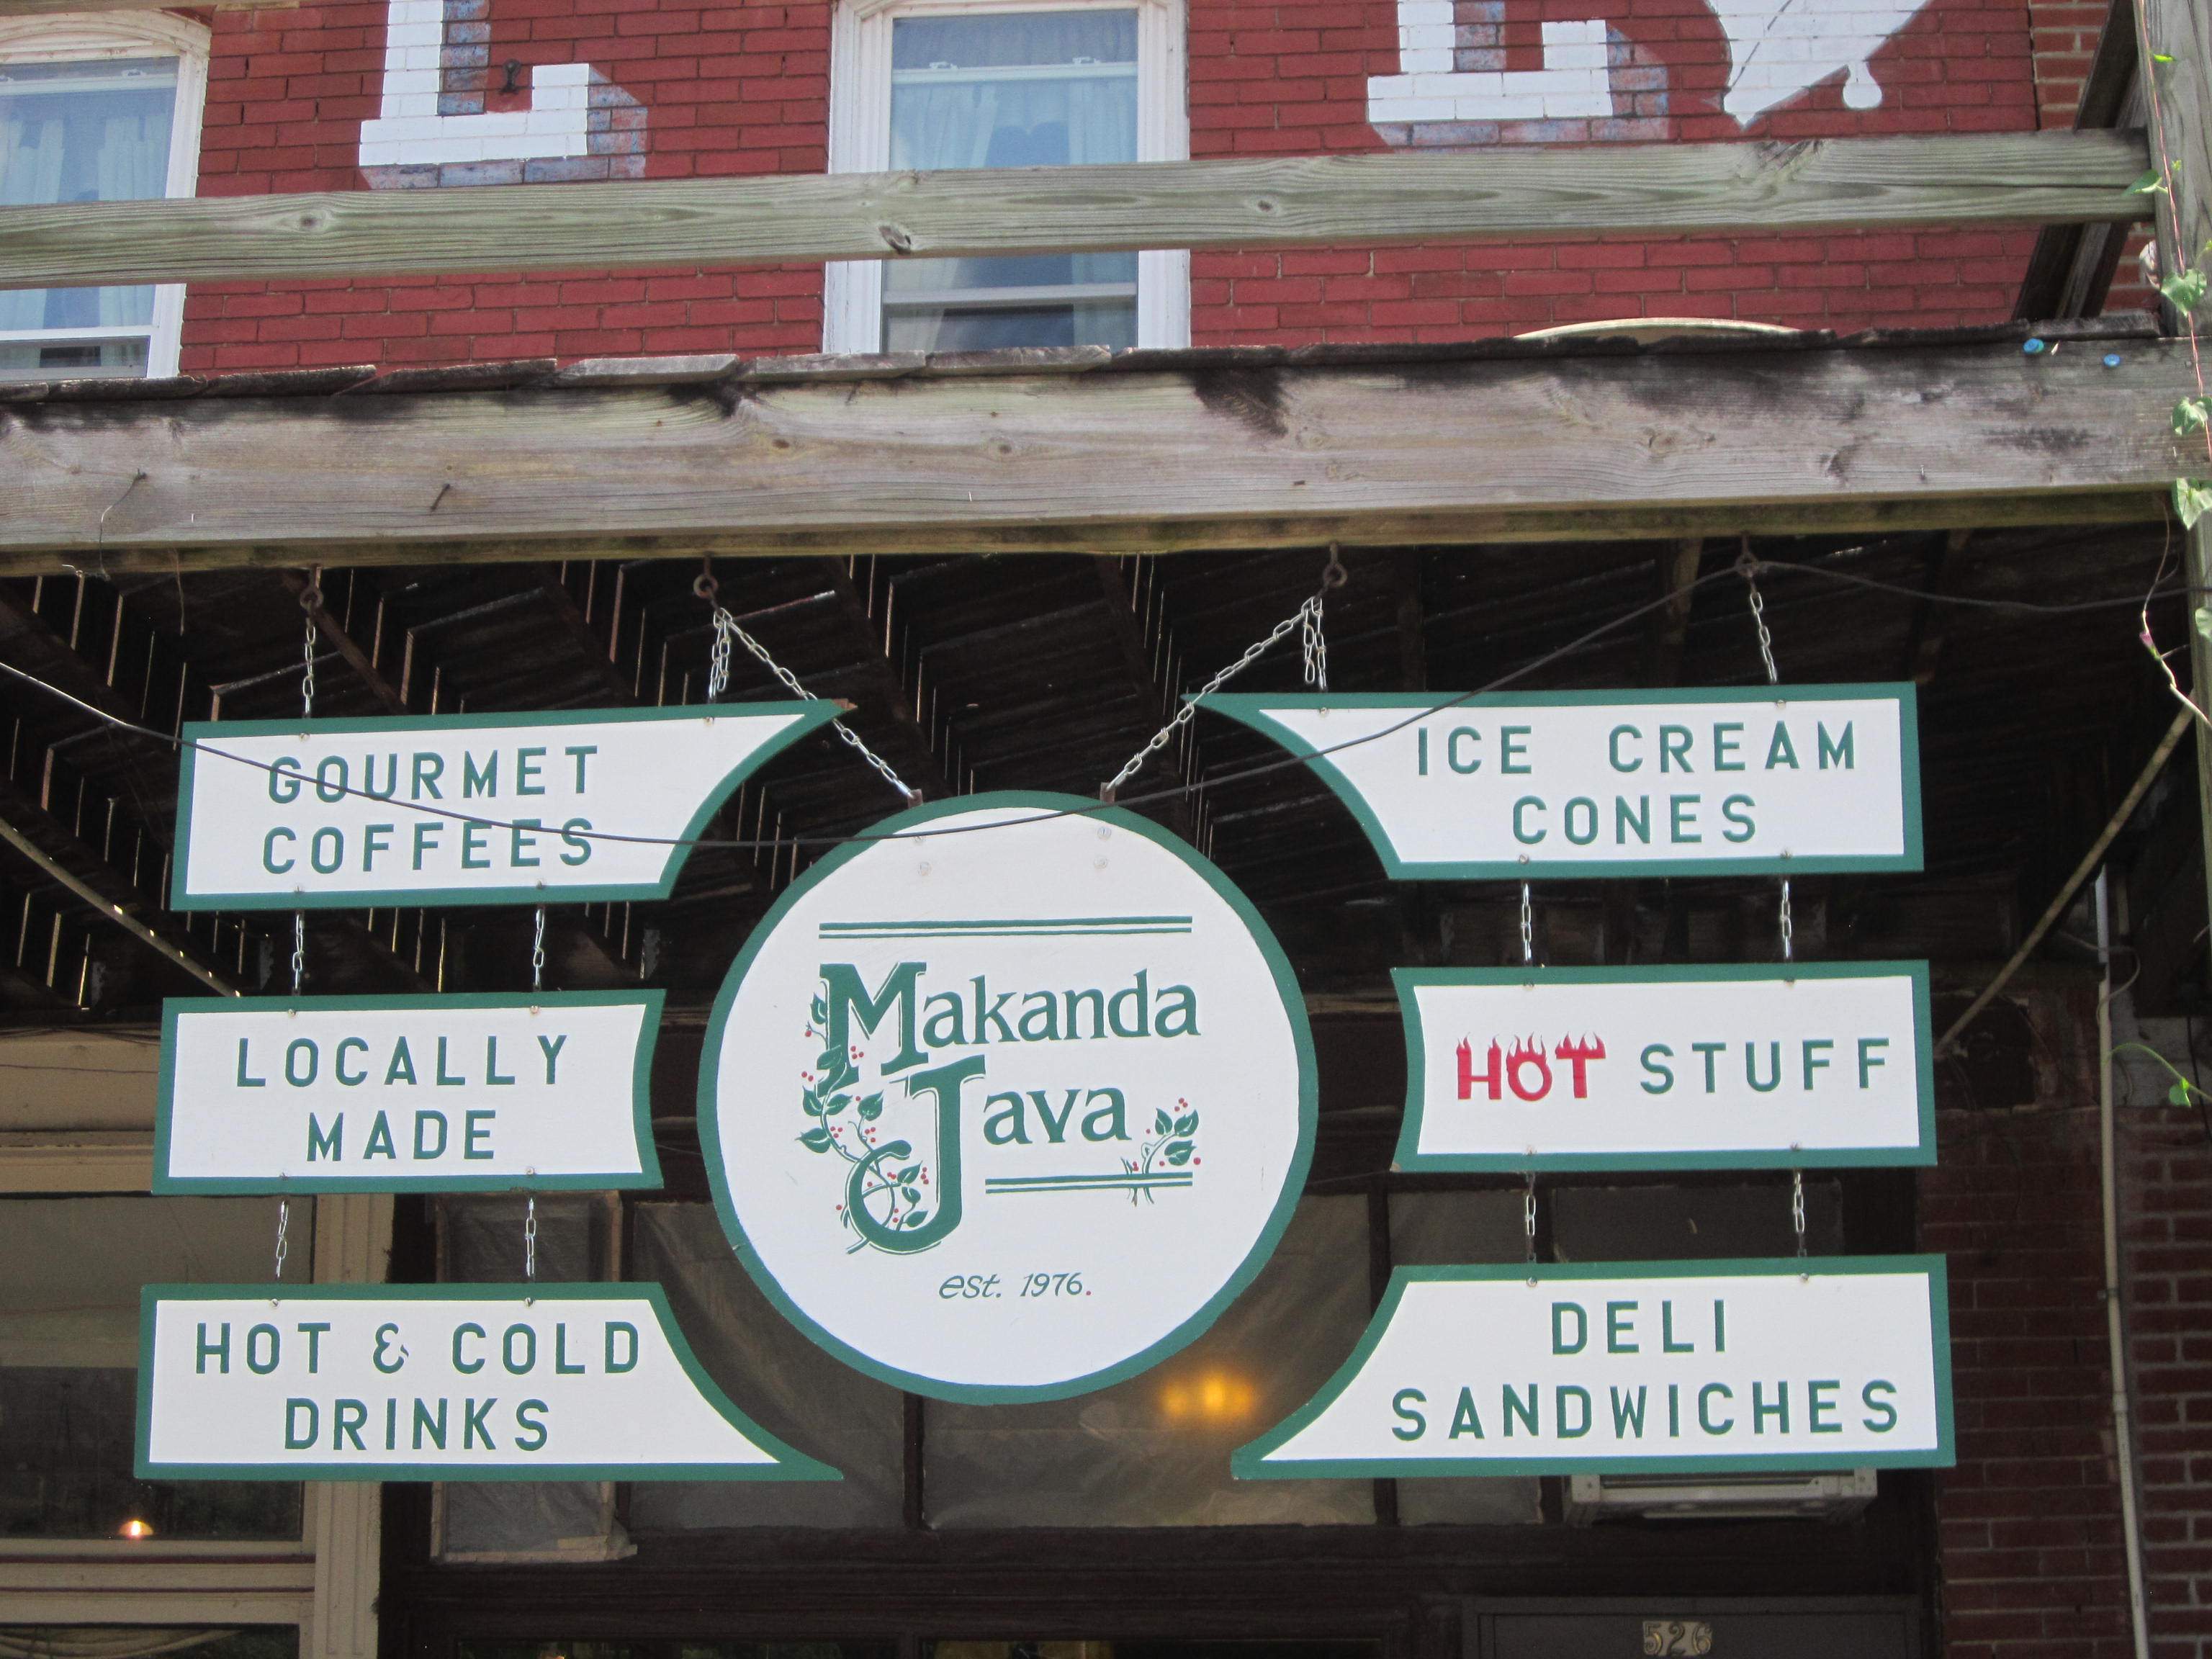 The sign in front of Makanda Java coffee shop, advertising its menu